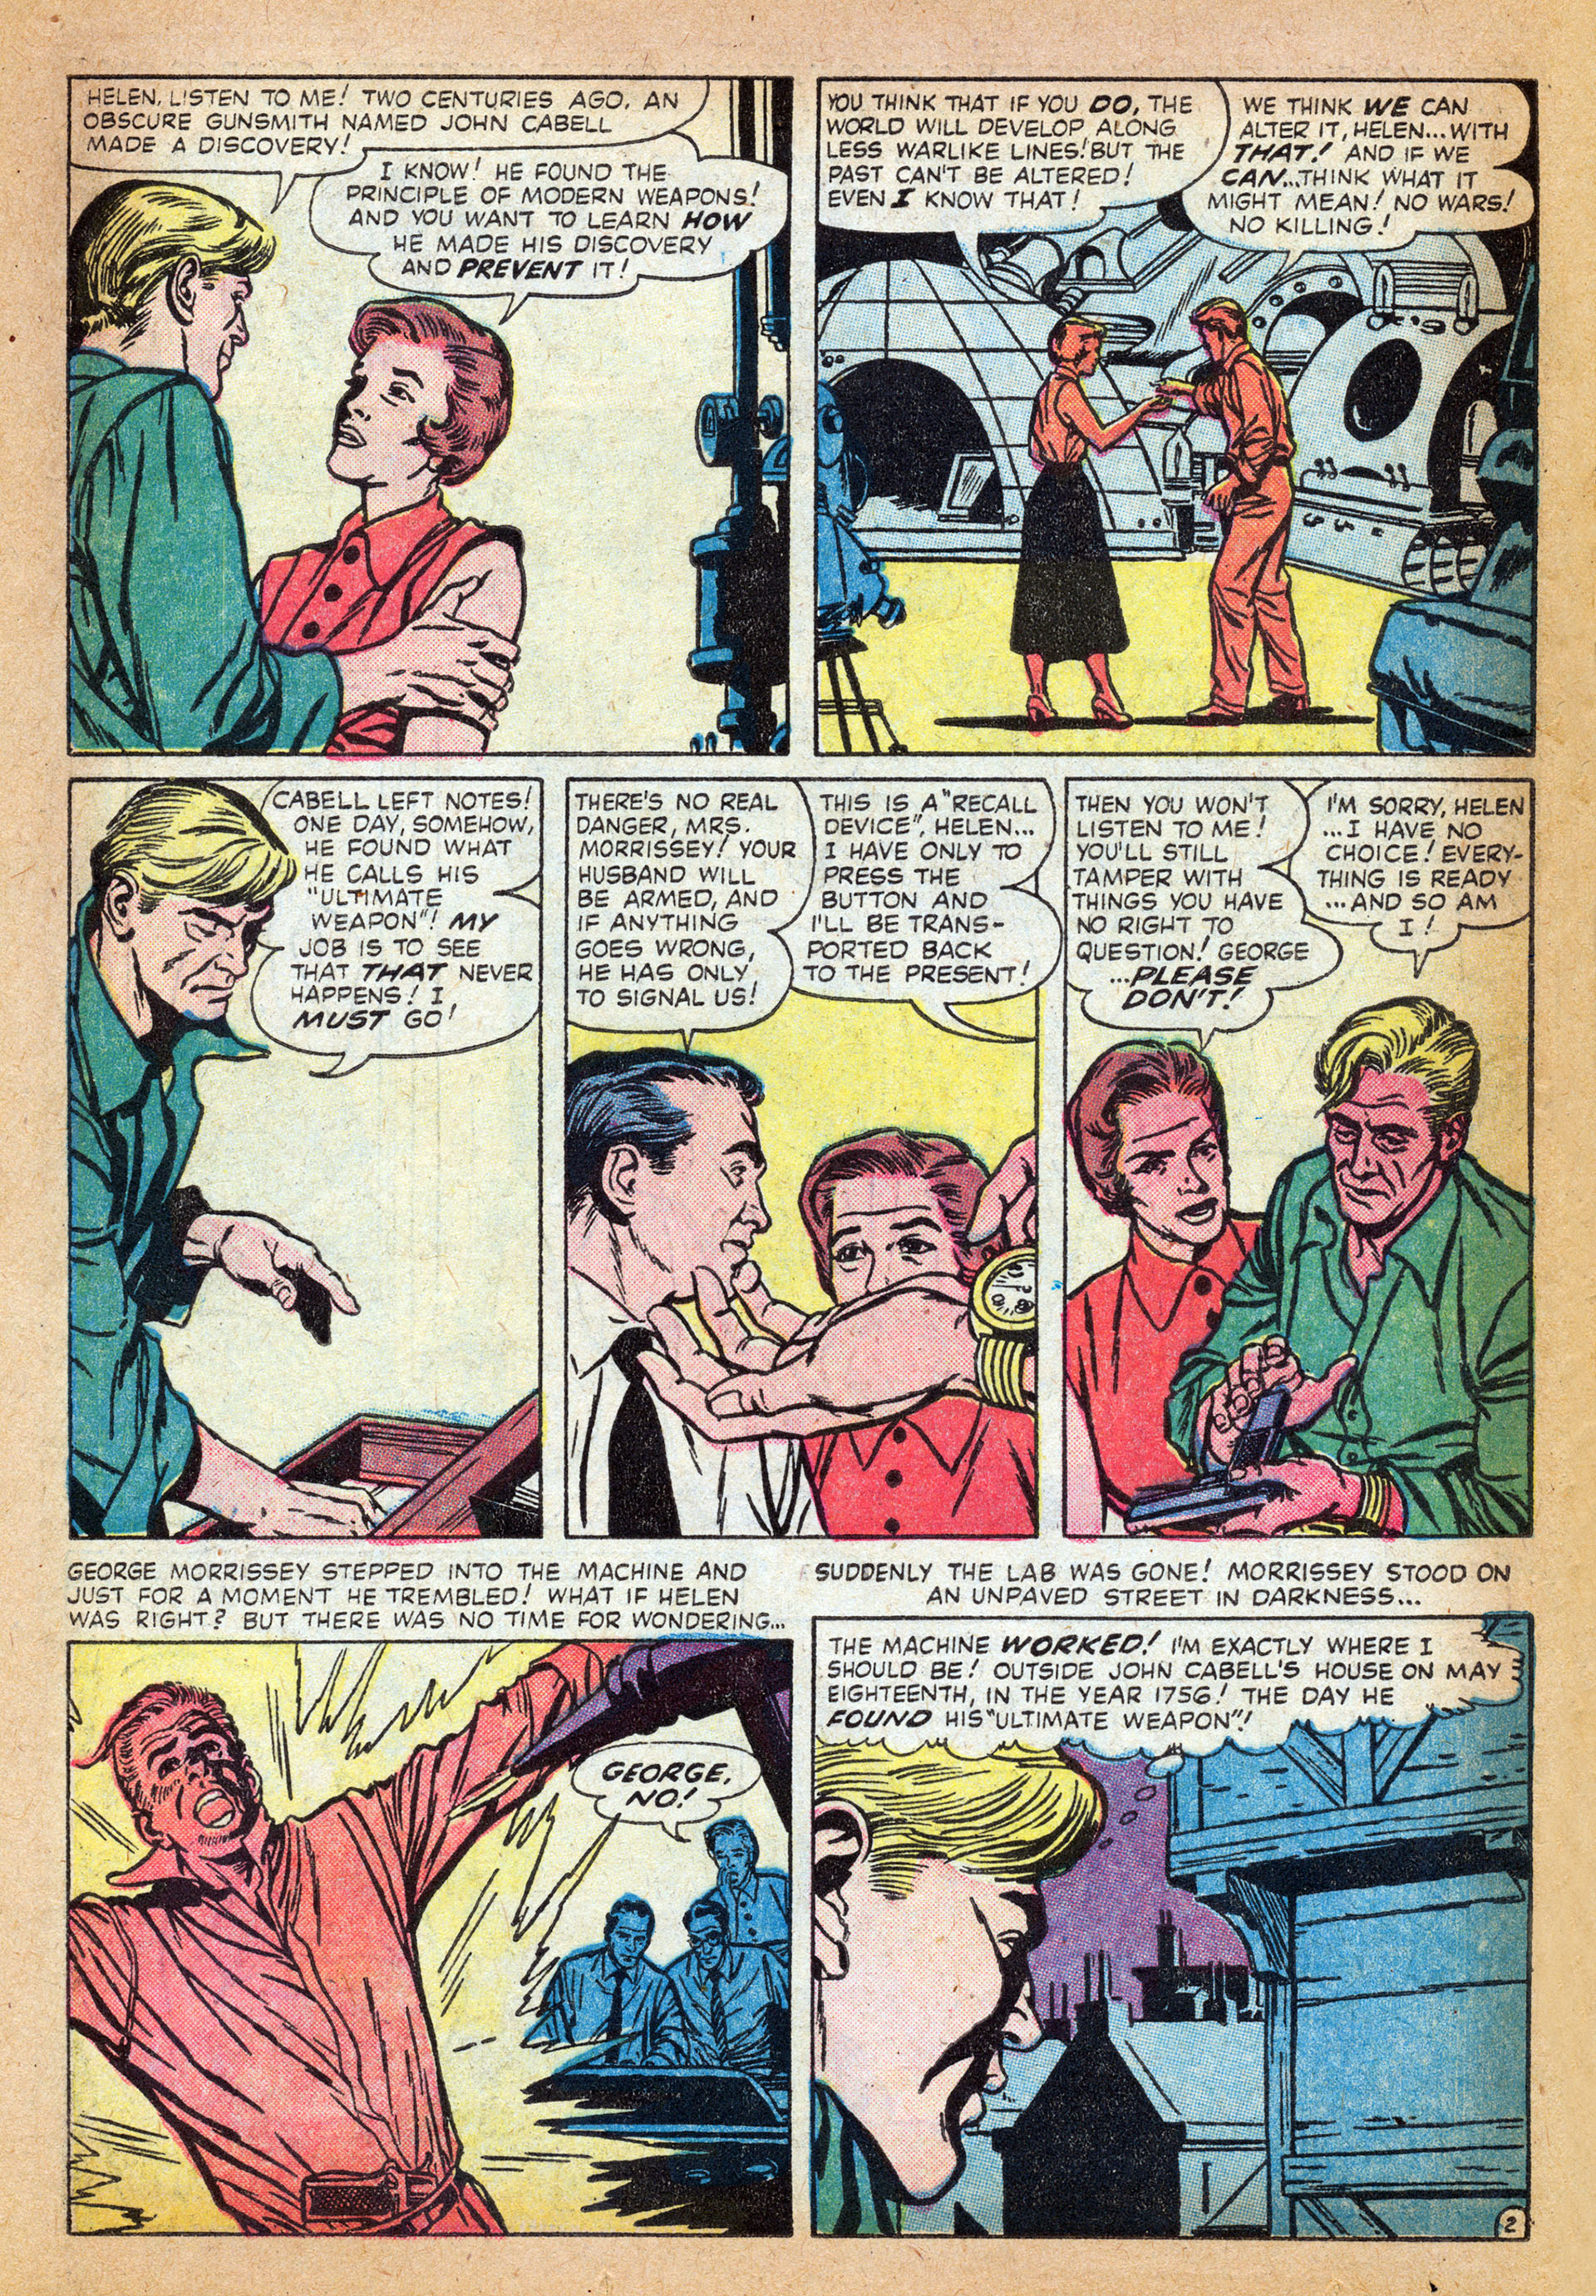 Marvel Tales (1949) 153 Page 13